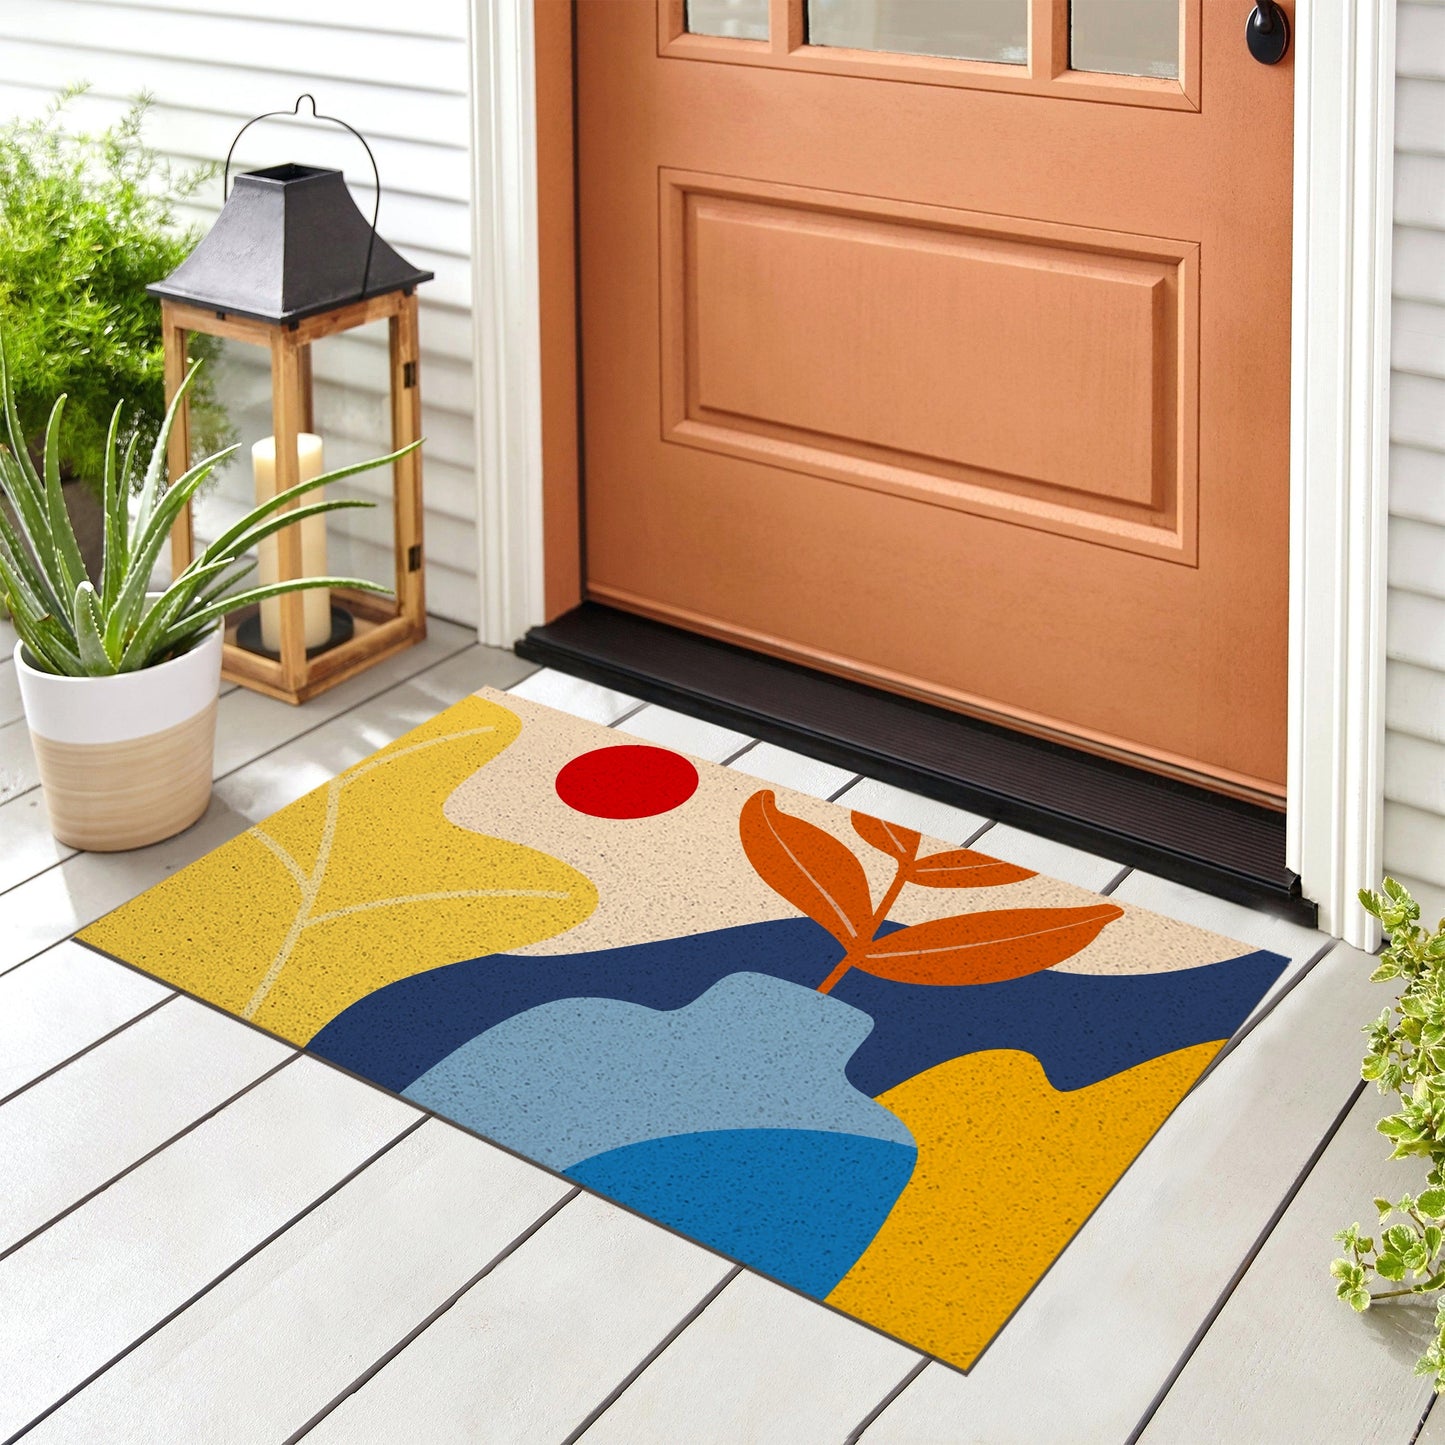 Feblilac Abstract Flower Pot Door Mat, Country Style Flower Patio Welcome Doormat, Anti Skid PVC Coil Outdoor Mats, Front Mat for Home, Washable Entryway Doormat - Feblilac® Mat